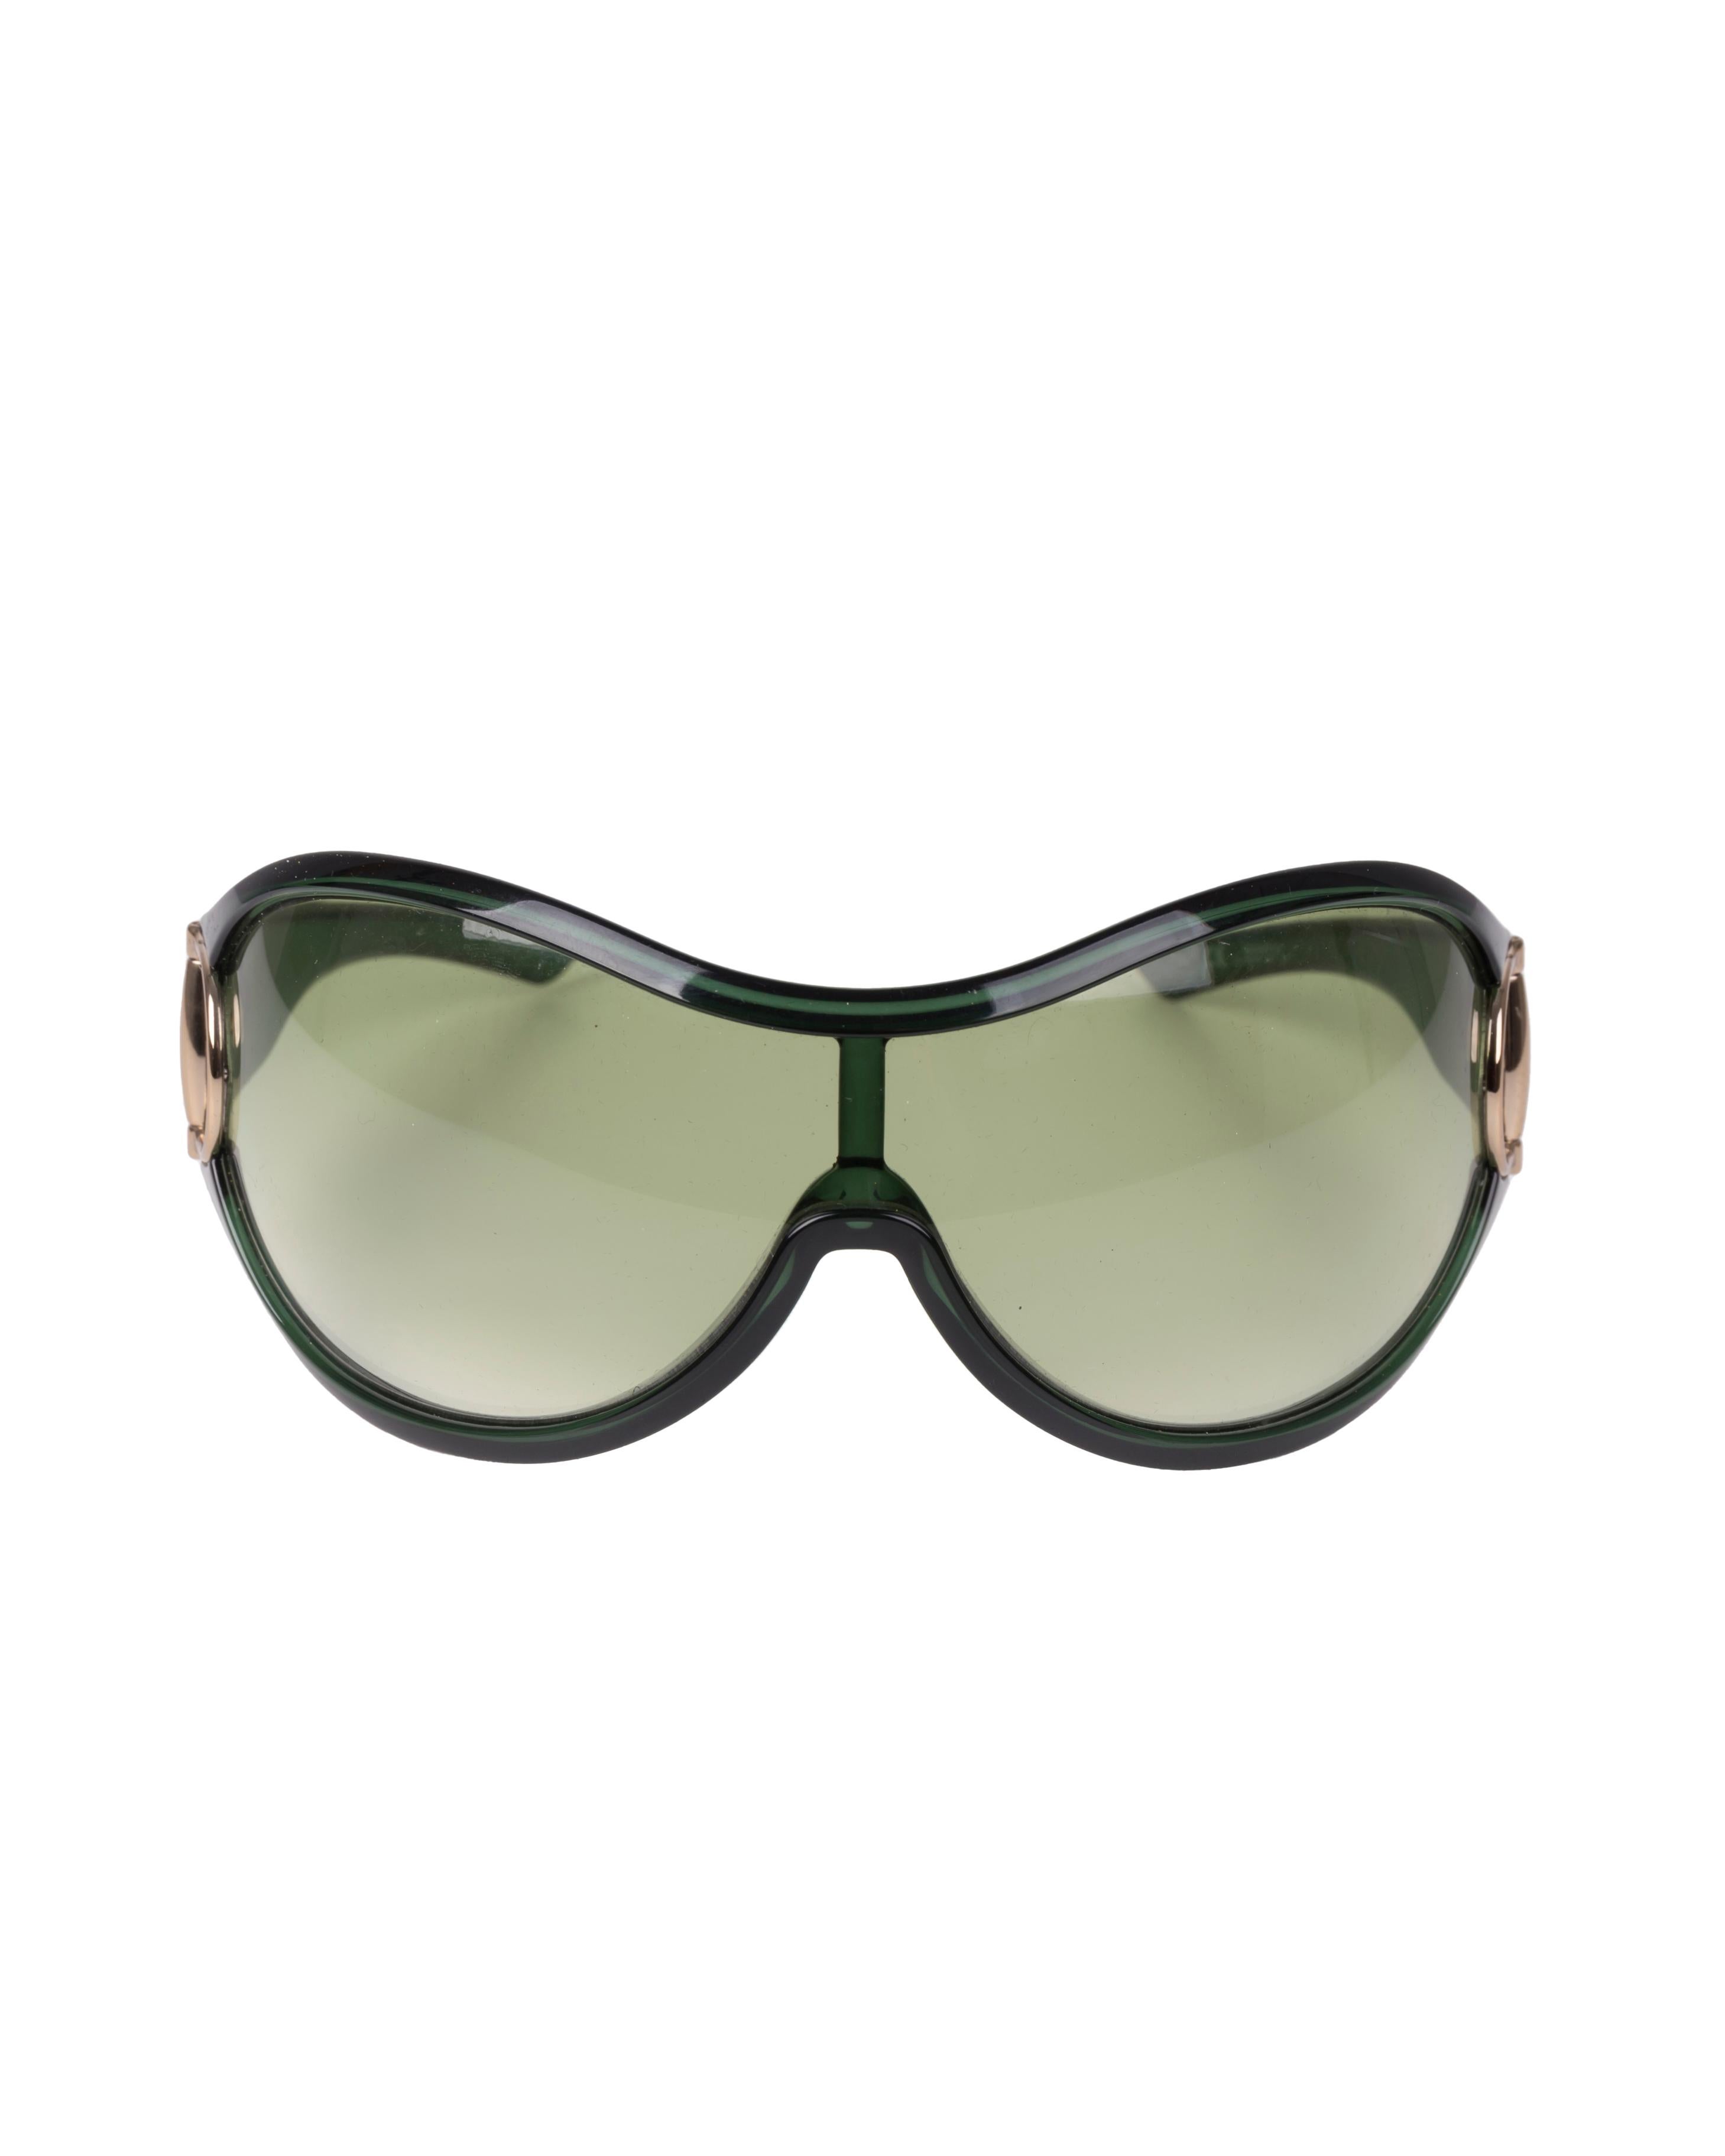 - Gucci by Alessandra Facchinetti
- Green acetate shield sunglasses
- Iconic metal horsebit as hinges
- Comes with original case